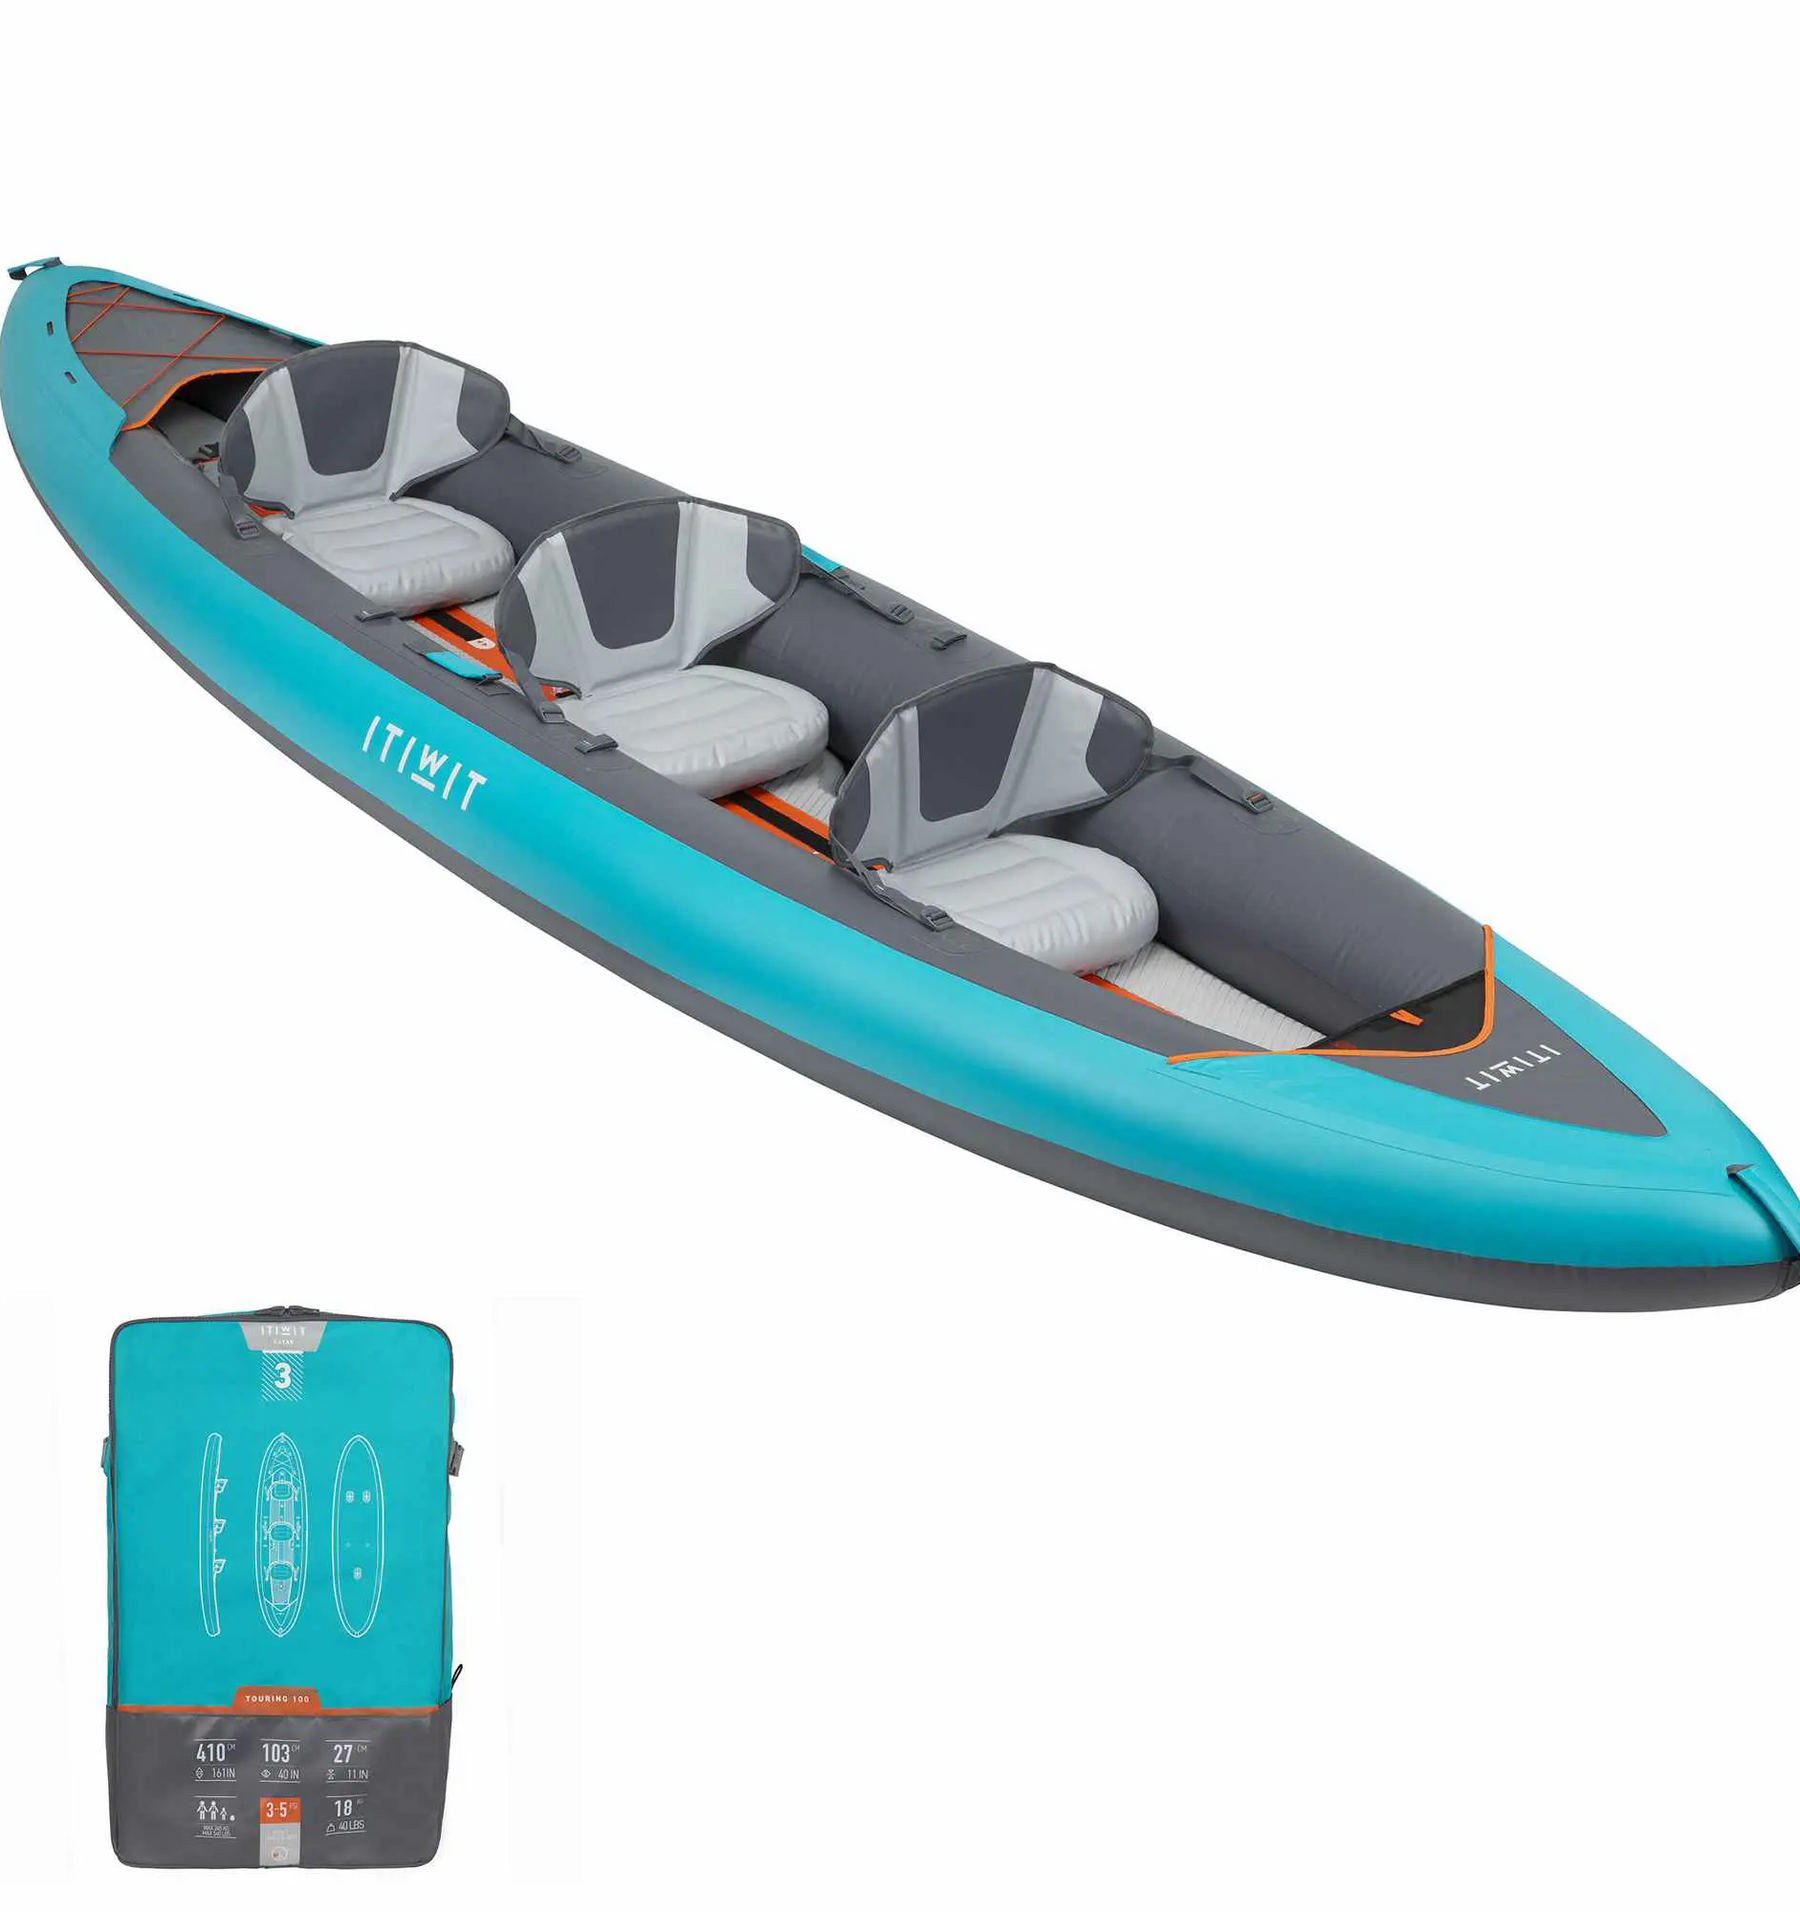 STRENFIT X500 HIGH-PRESSURE DROP-STITCH INFLATABLE KAYAK - 2 PERSON